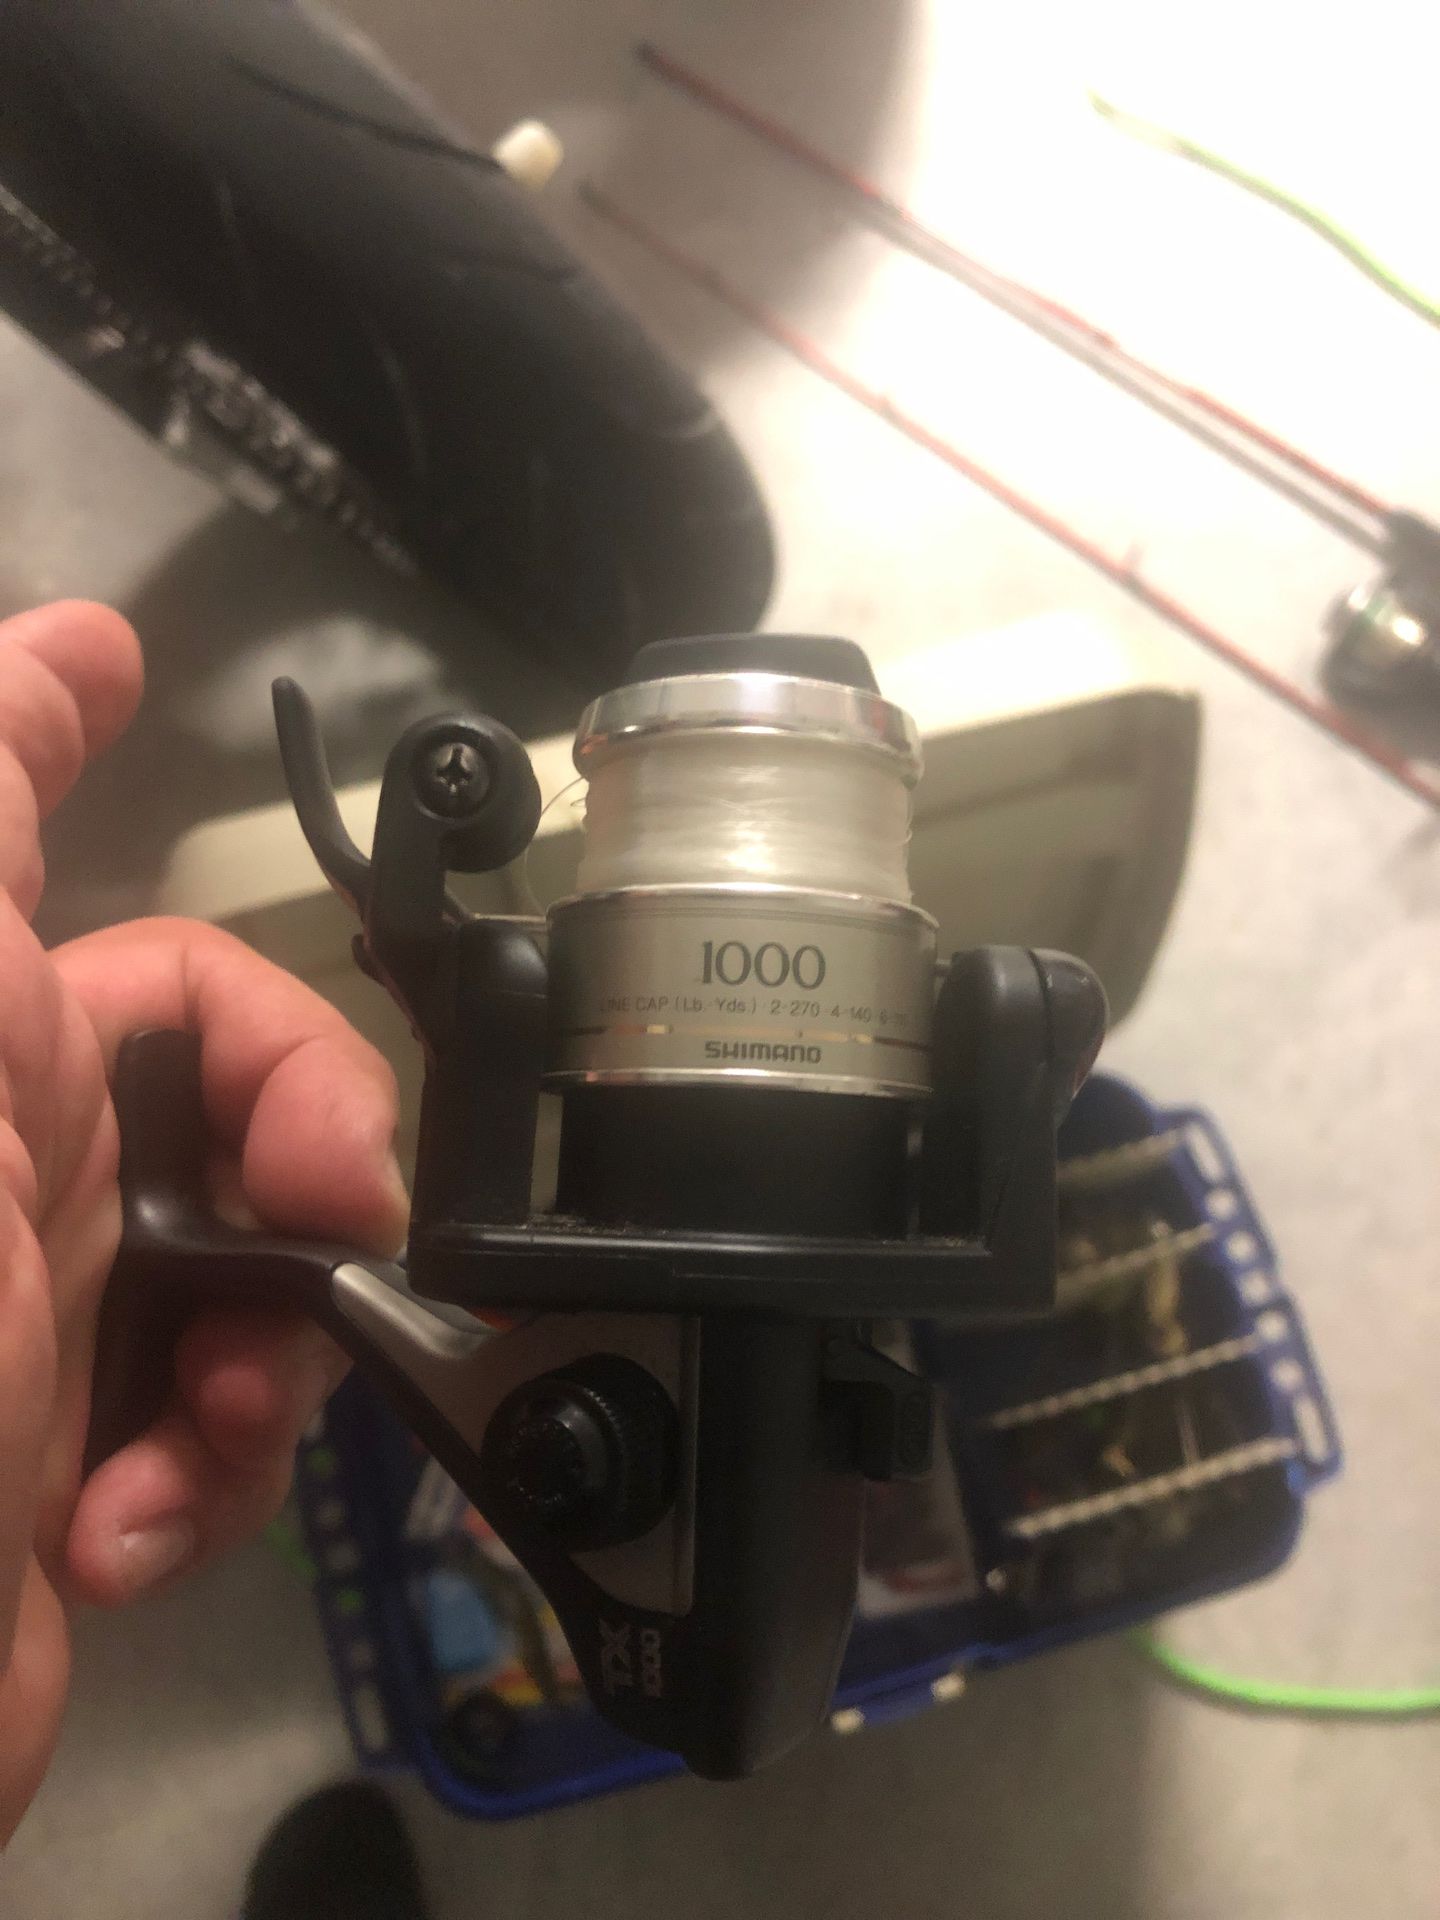 Shimano TX 1000 spinning real quick fire